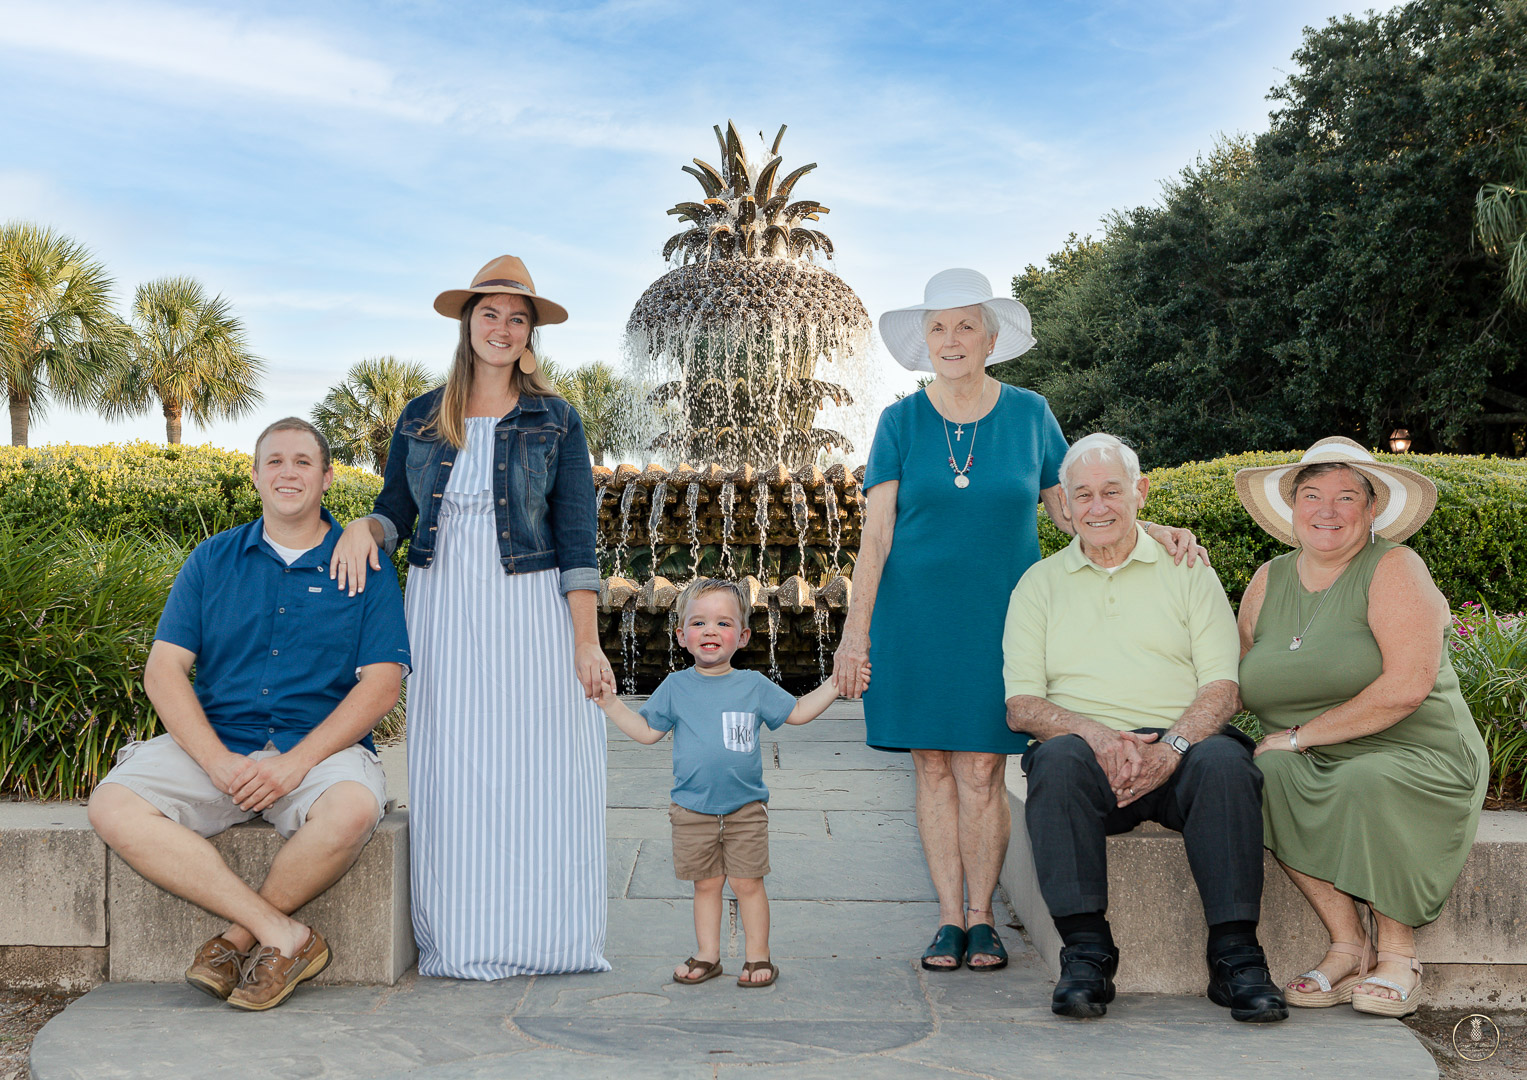 Extended family portrait by Brisson Imagery. Family of 6 lined up in front of Pineapple fountain in Charleston SC. Everyone is color coordinated in blue and green. The woman all have large brim sun hats on. One toddler boy stand in the middle